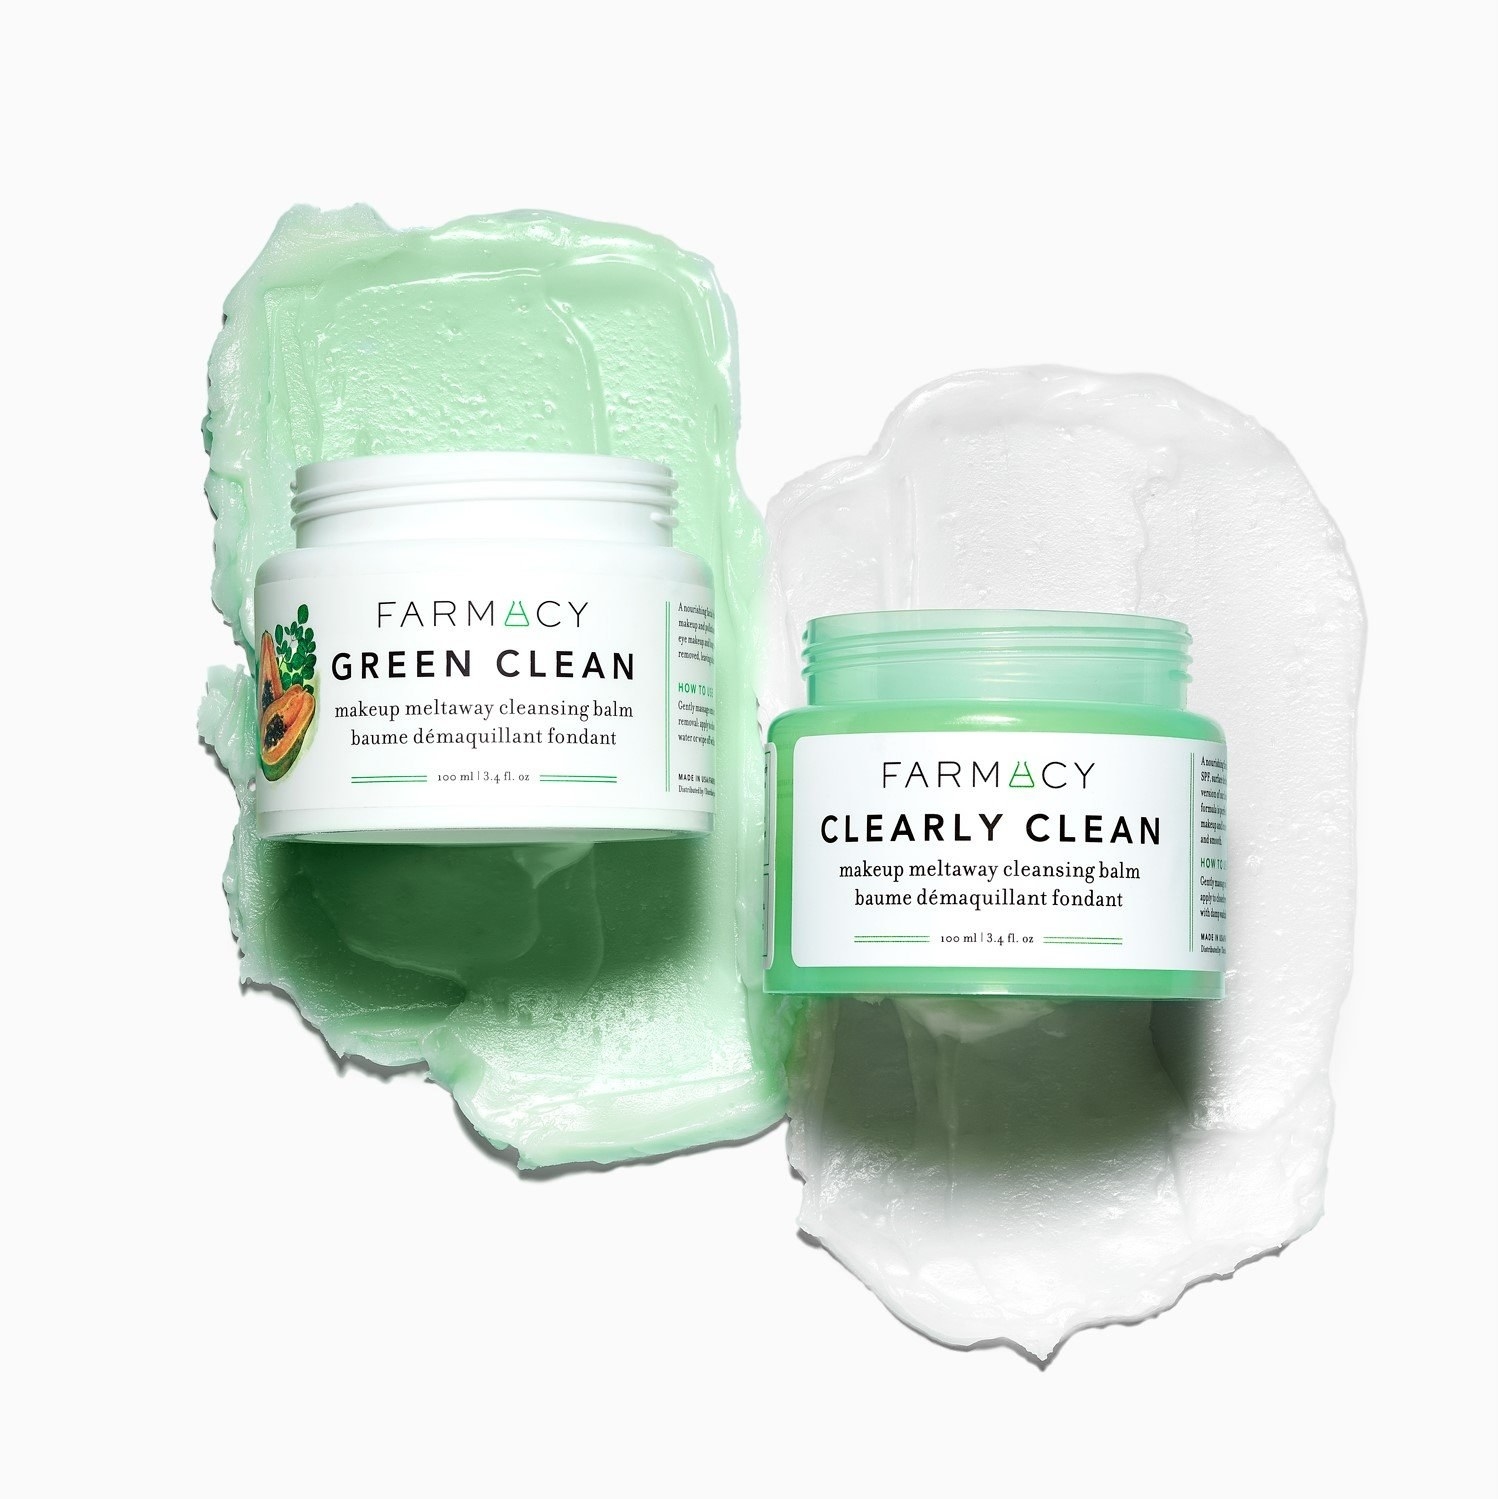 the green clean and clearly clean balms next to each other